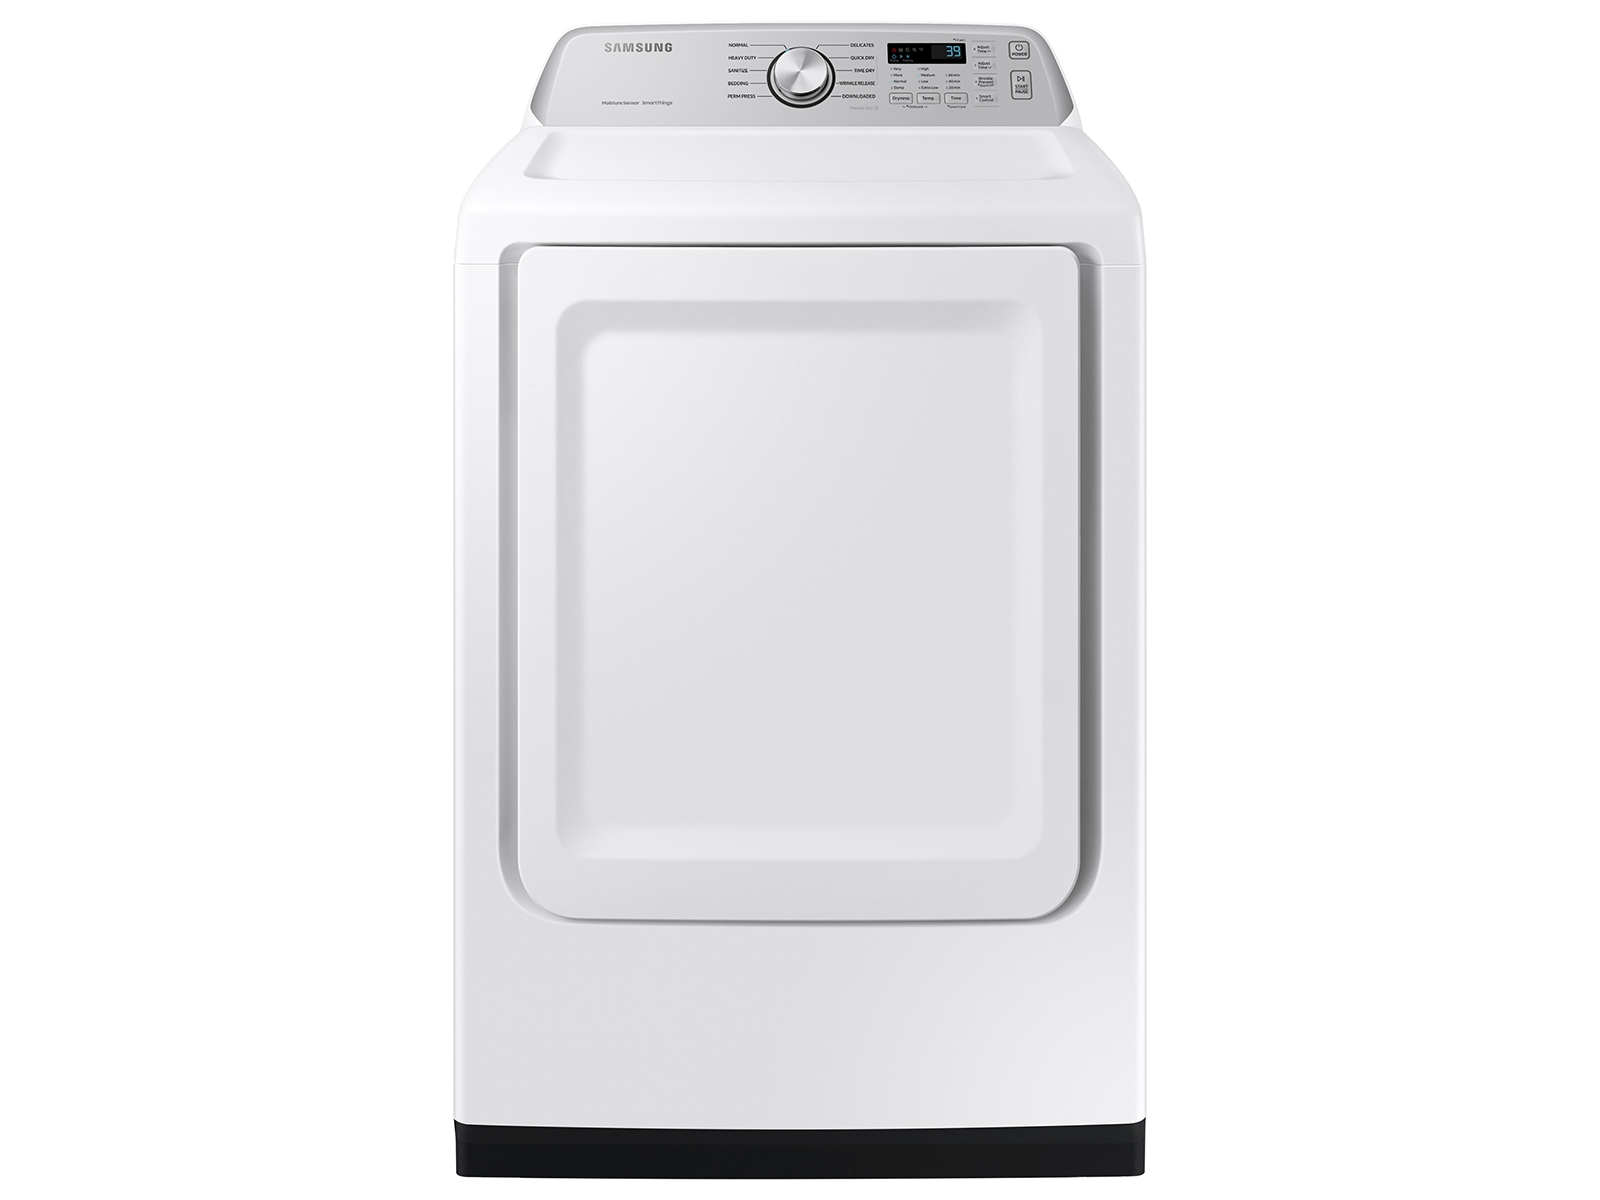 Photos - Tumble Dryer Samsung 7.4 cu. ft. Smart Electric Dryer with Sensor Dry in White(DVE47CG3 